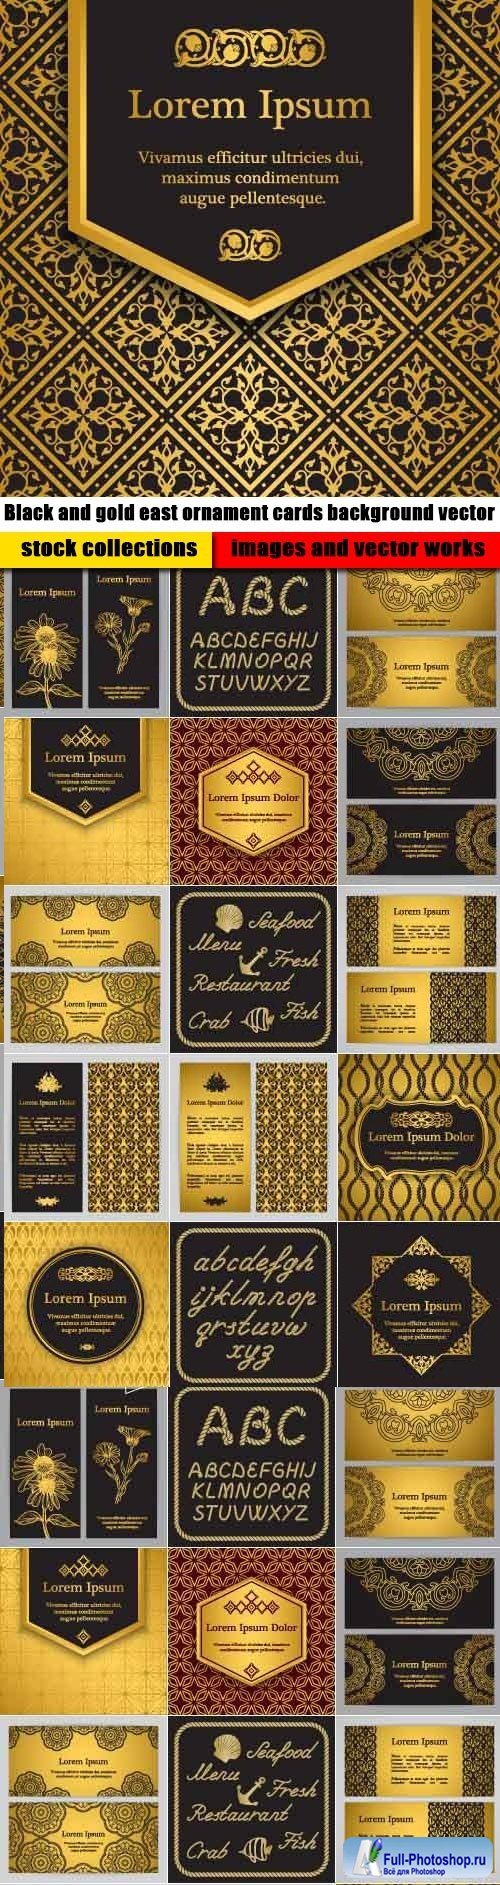 Black and gold east ornament cards background vector